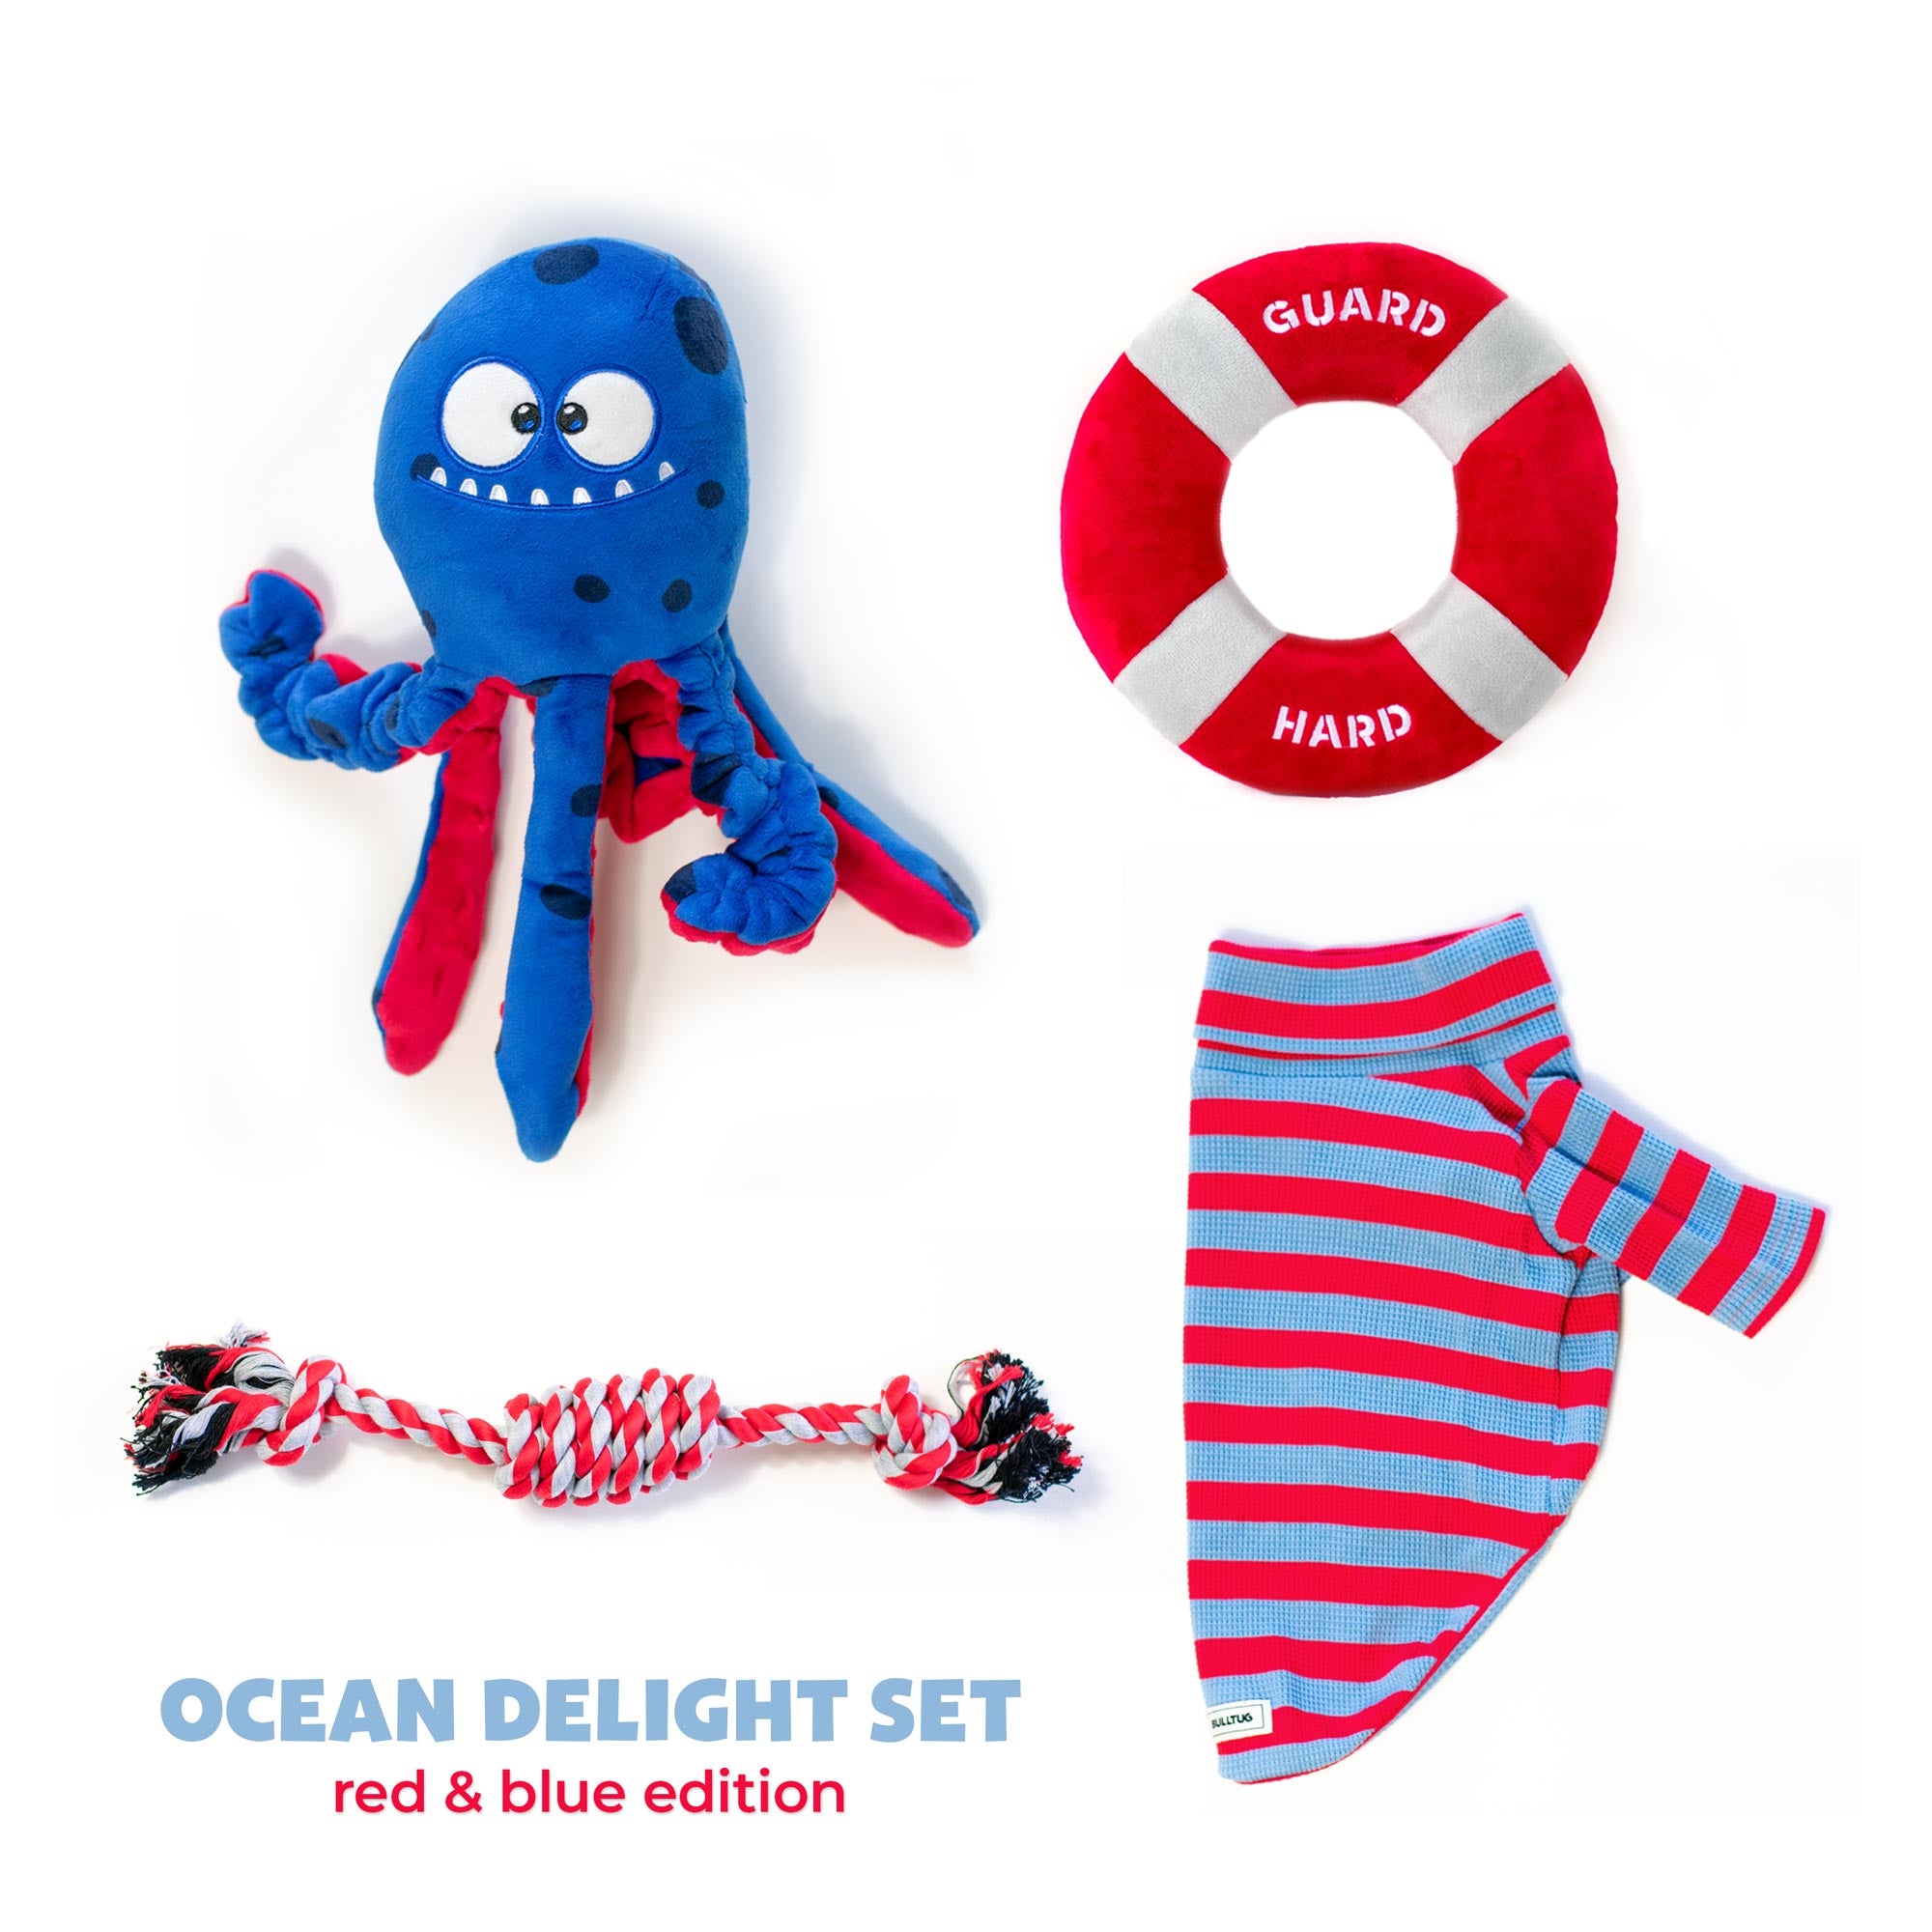 Seaside Fun Unleashed: The Ocean Delight Set for Pups